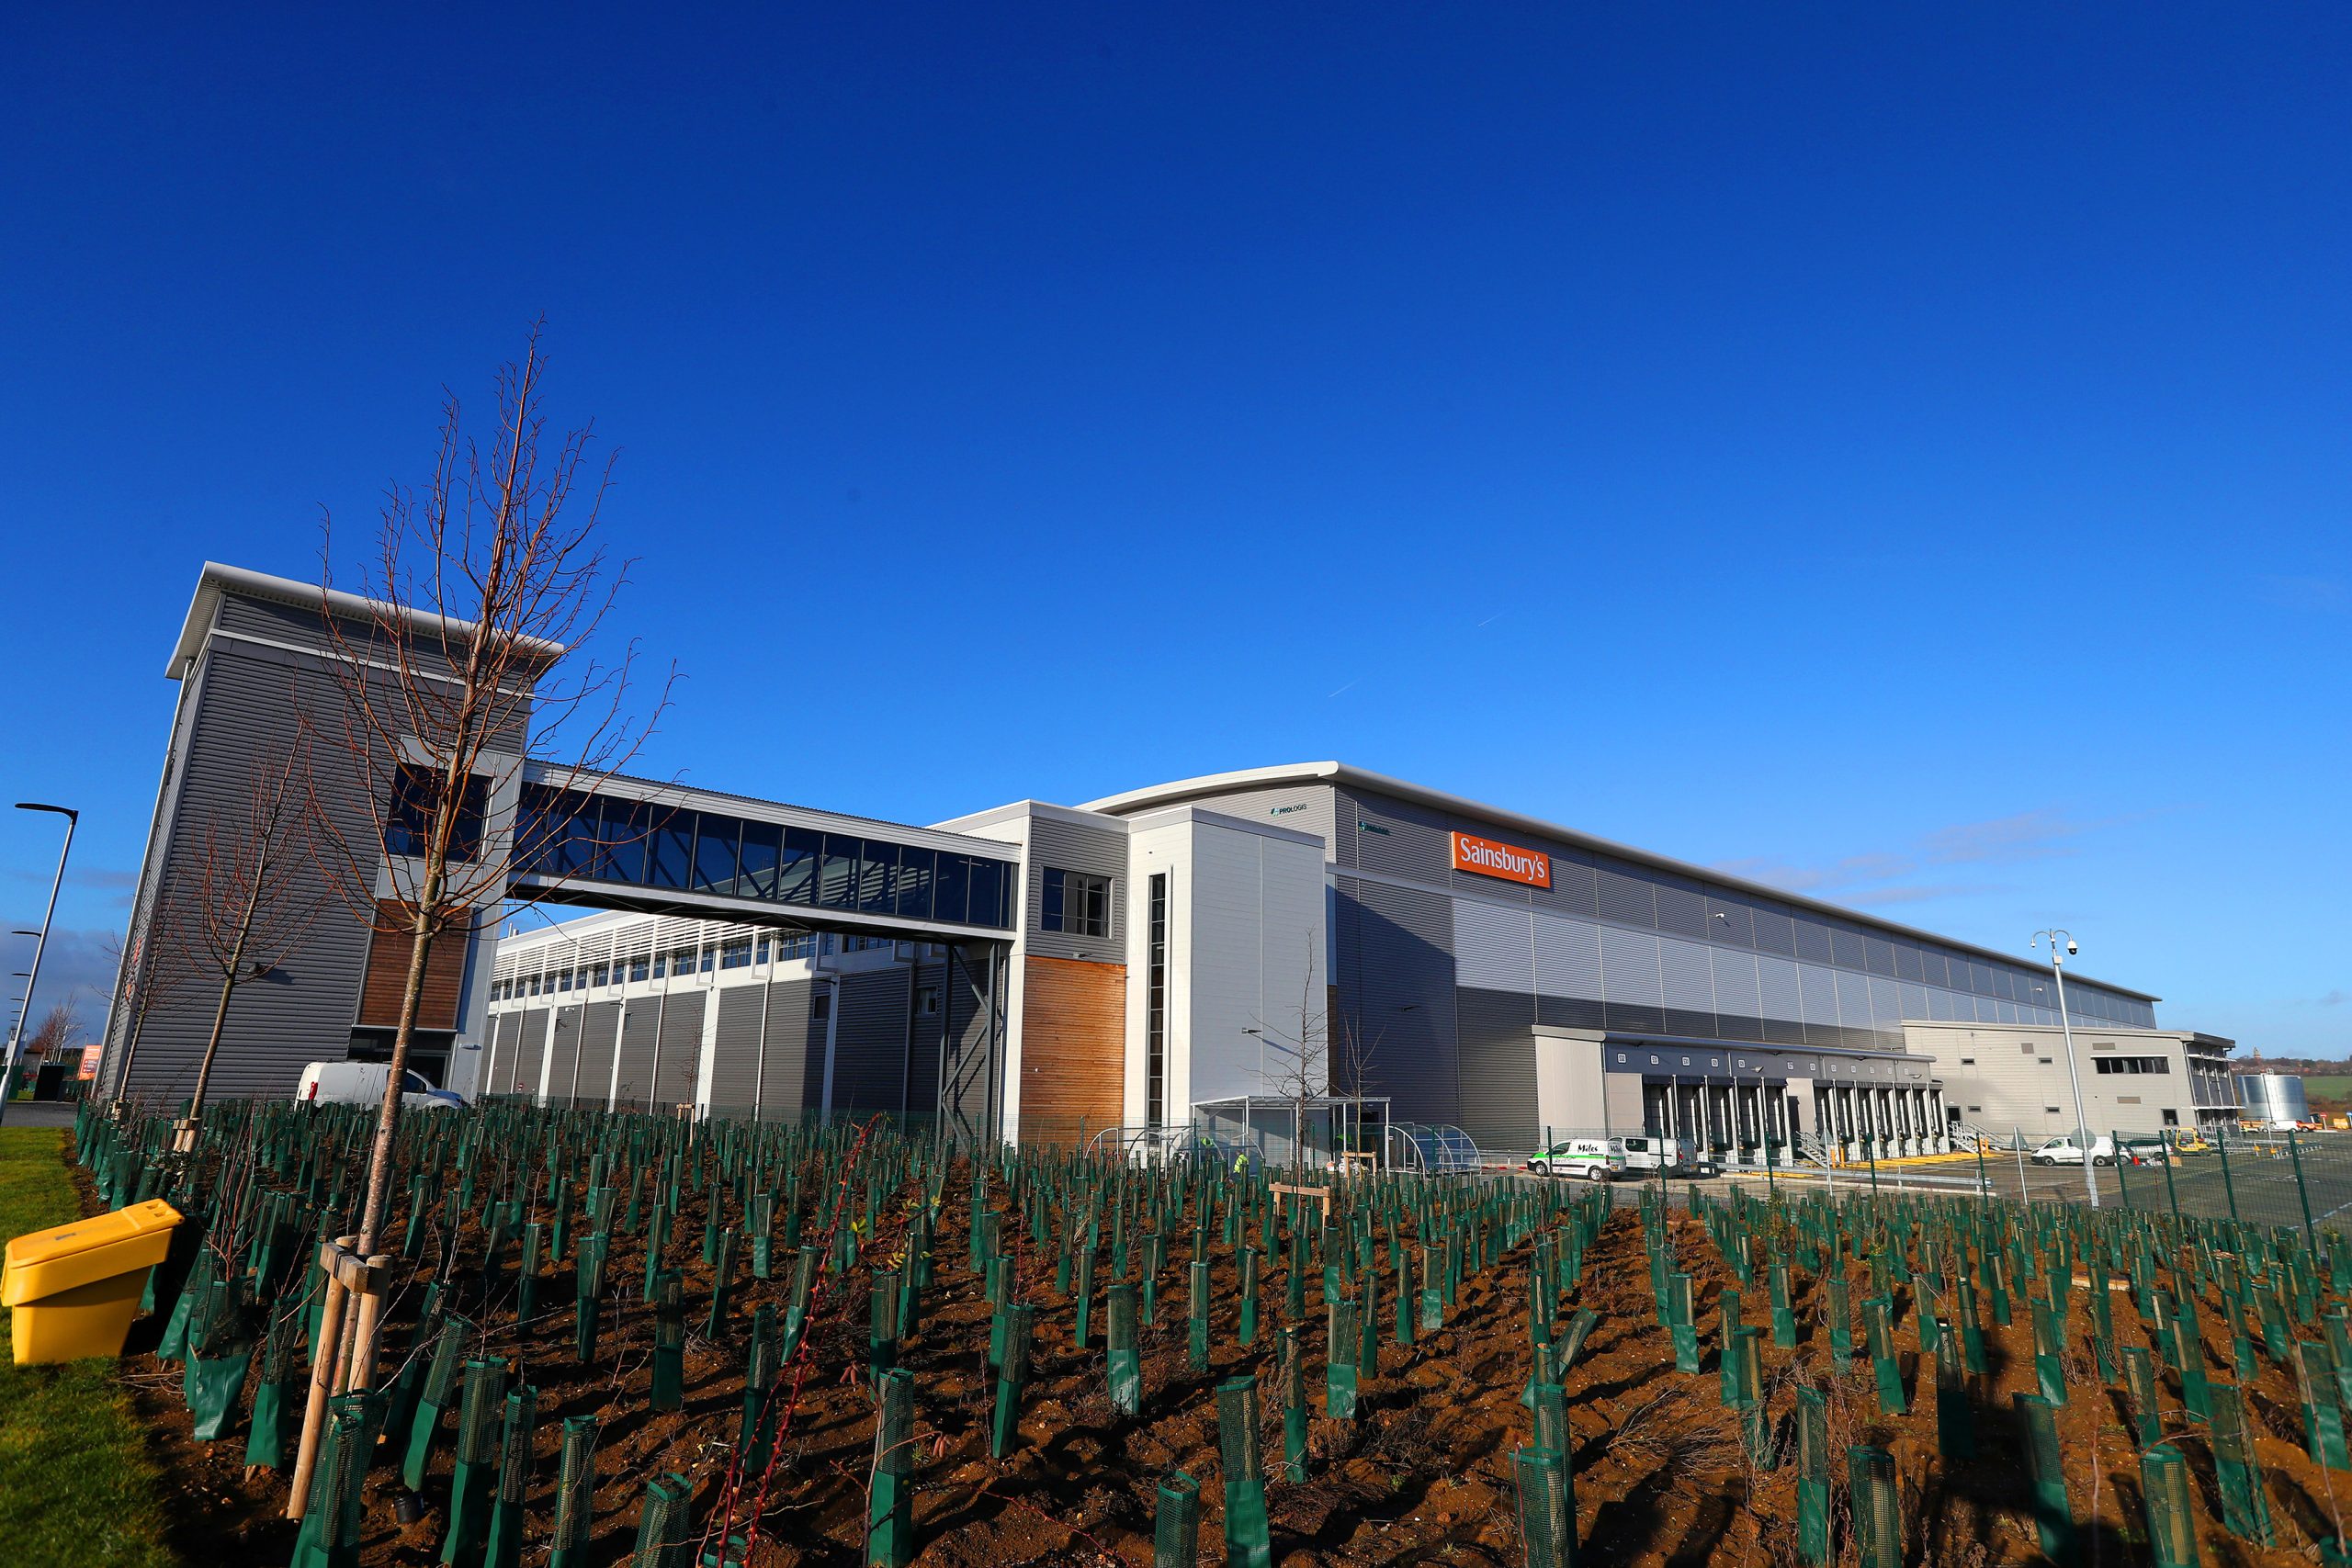 SAINSBURYS PINEHAM FROZEN NATIONAL DISTRIBUTION CENTRE - BASE BUILD
Pictures by Adam Fradgley
Pictured at GV / General View of the exterior & signage
The new Sainsbury's National Frozen Distribution Centre featuring a 2.7KM2 -25c freezer - built by Base Build Services